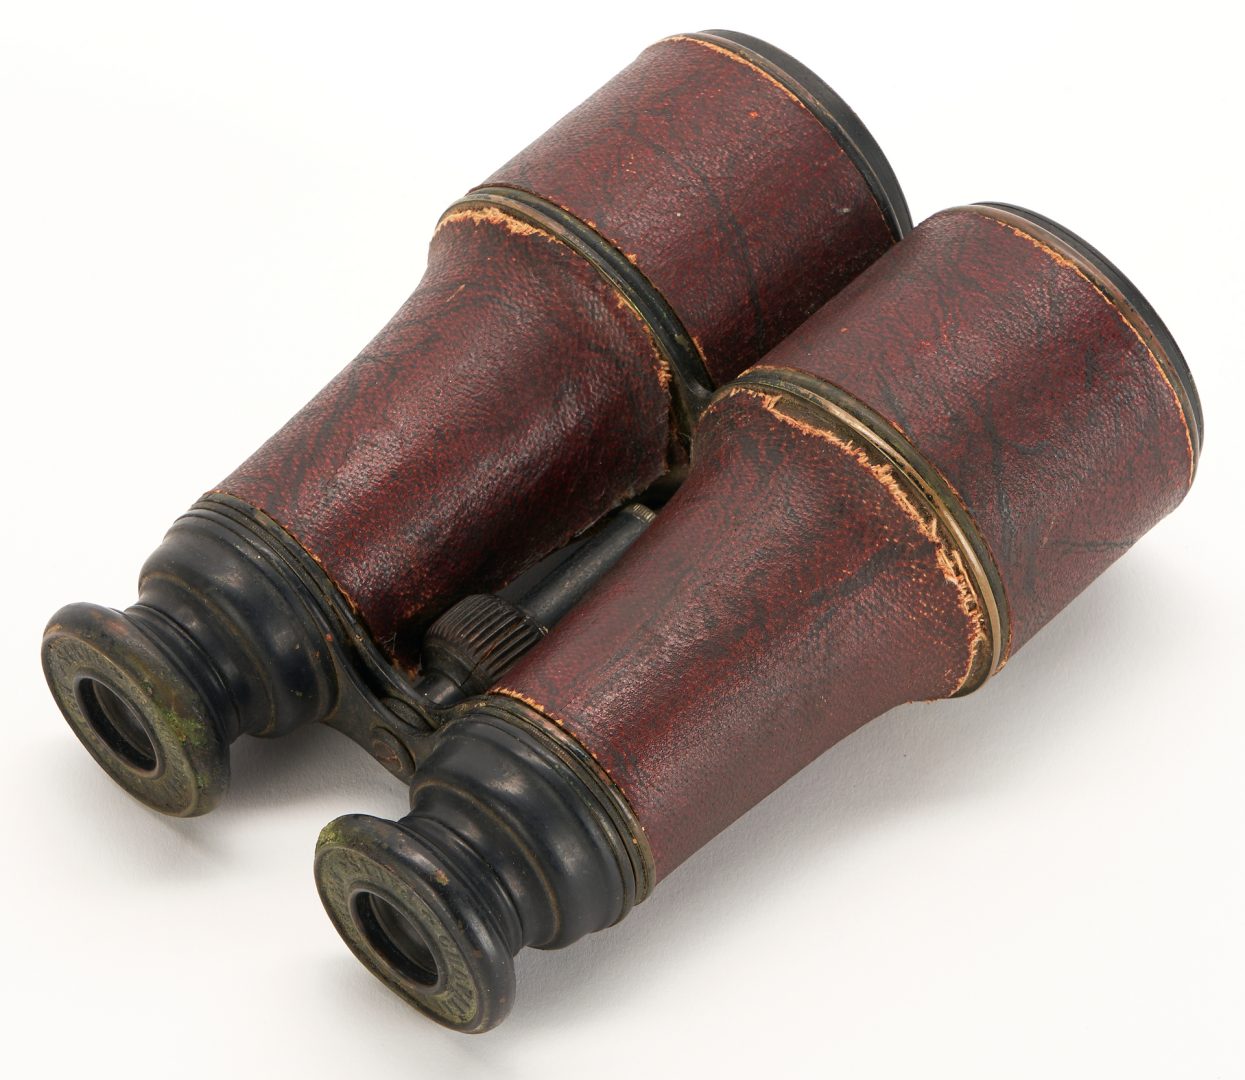 Lot 662: 5 WWI Items incl. Binoculars and FDR Letter